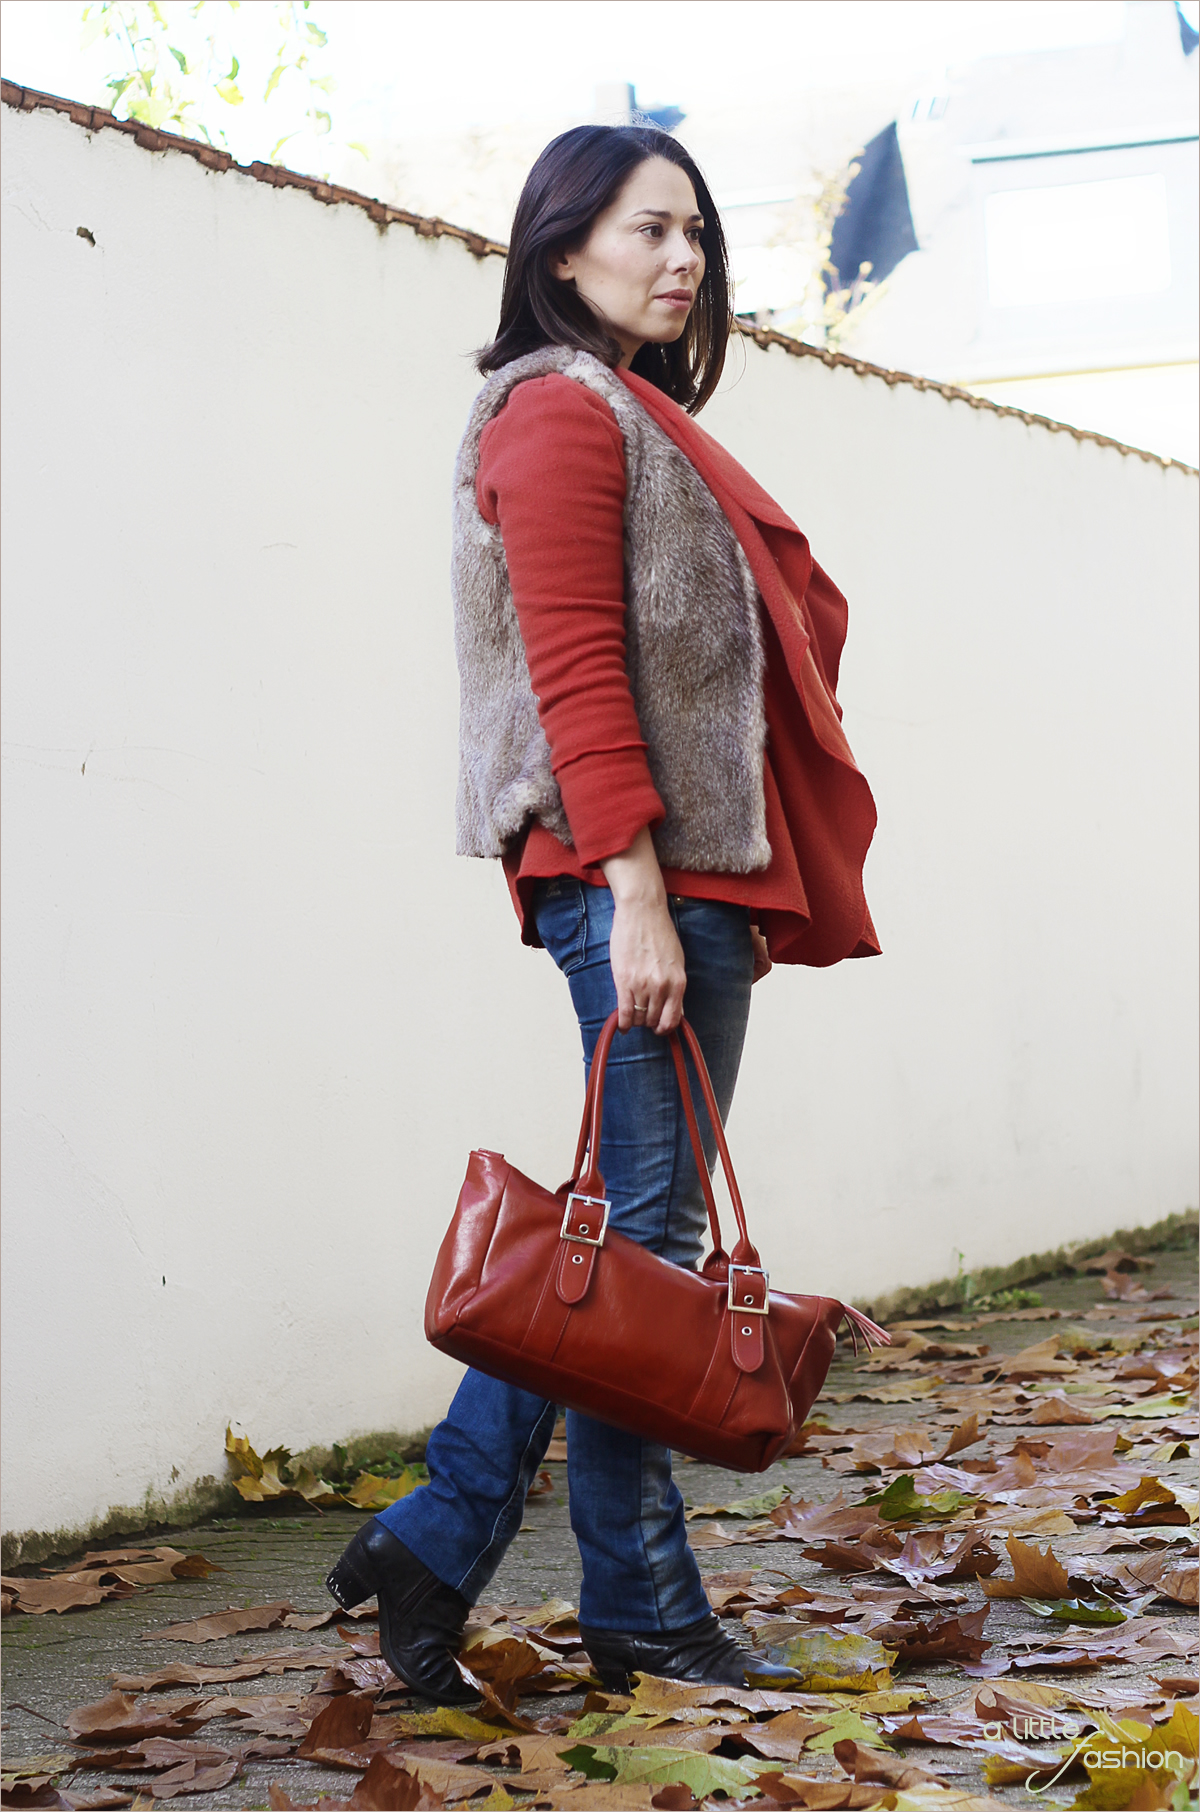 Ein letztes Herbst-Outfit | A Little Fashion | https://www.filizity.com/fashion/ein-letztes-herbst-outfit